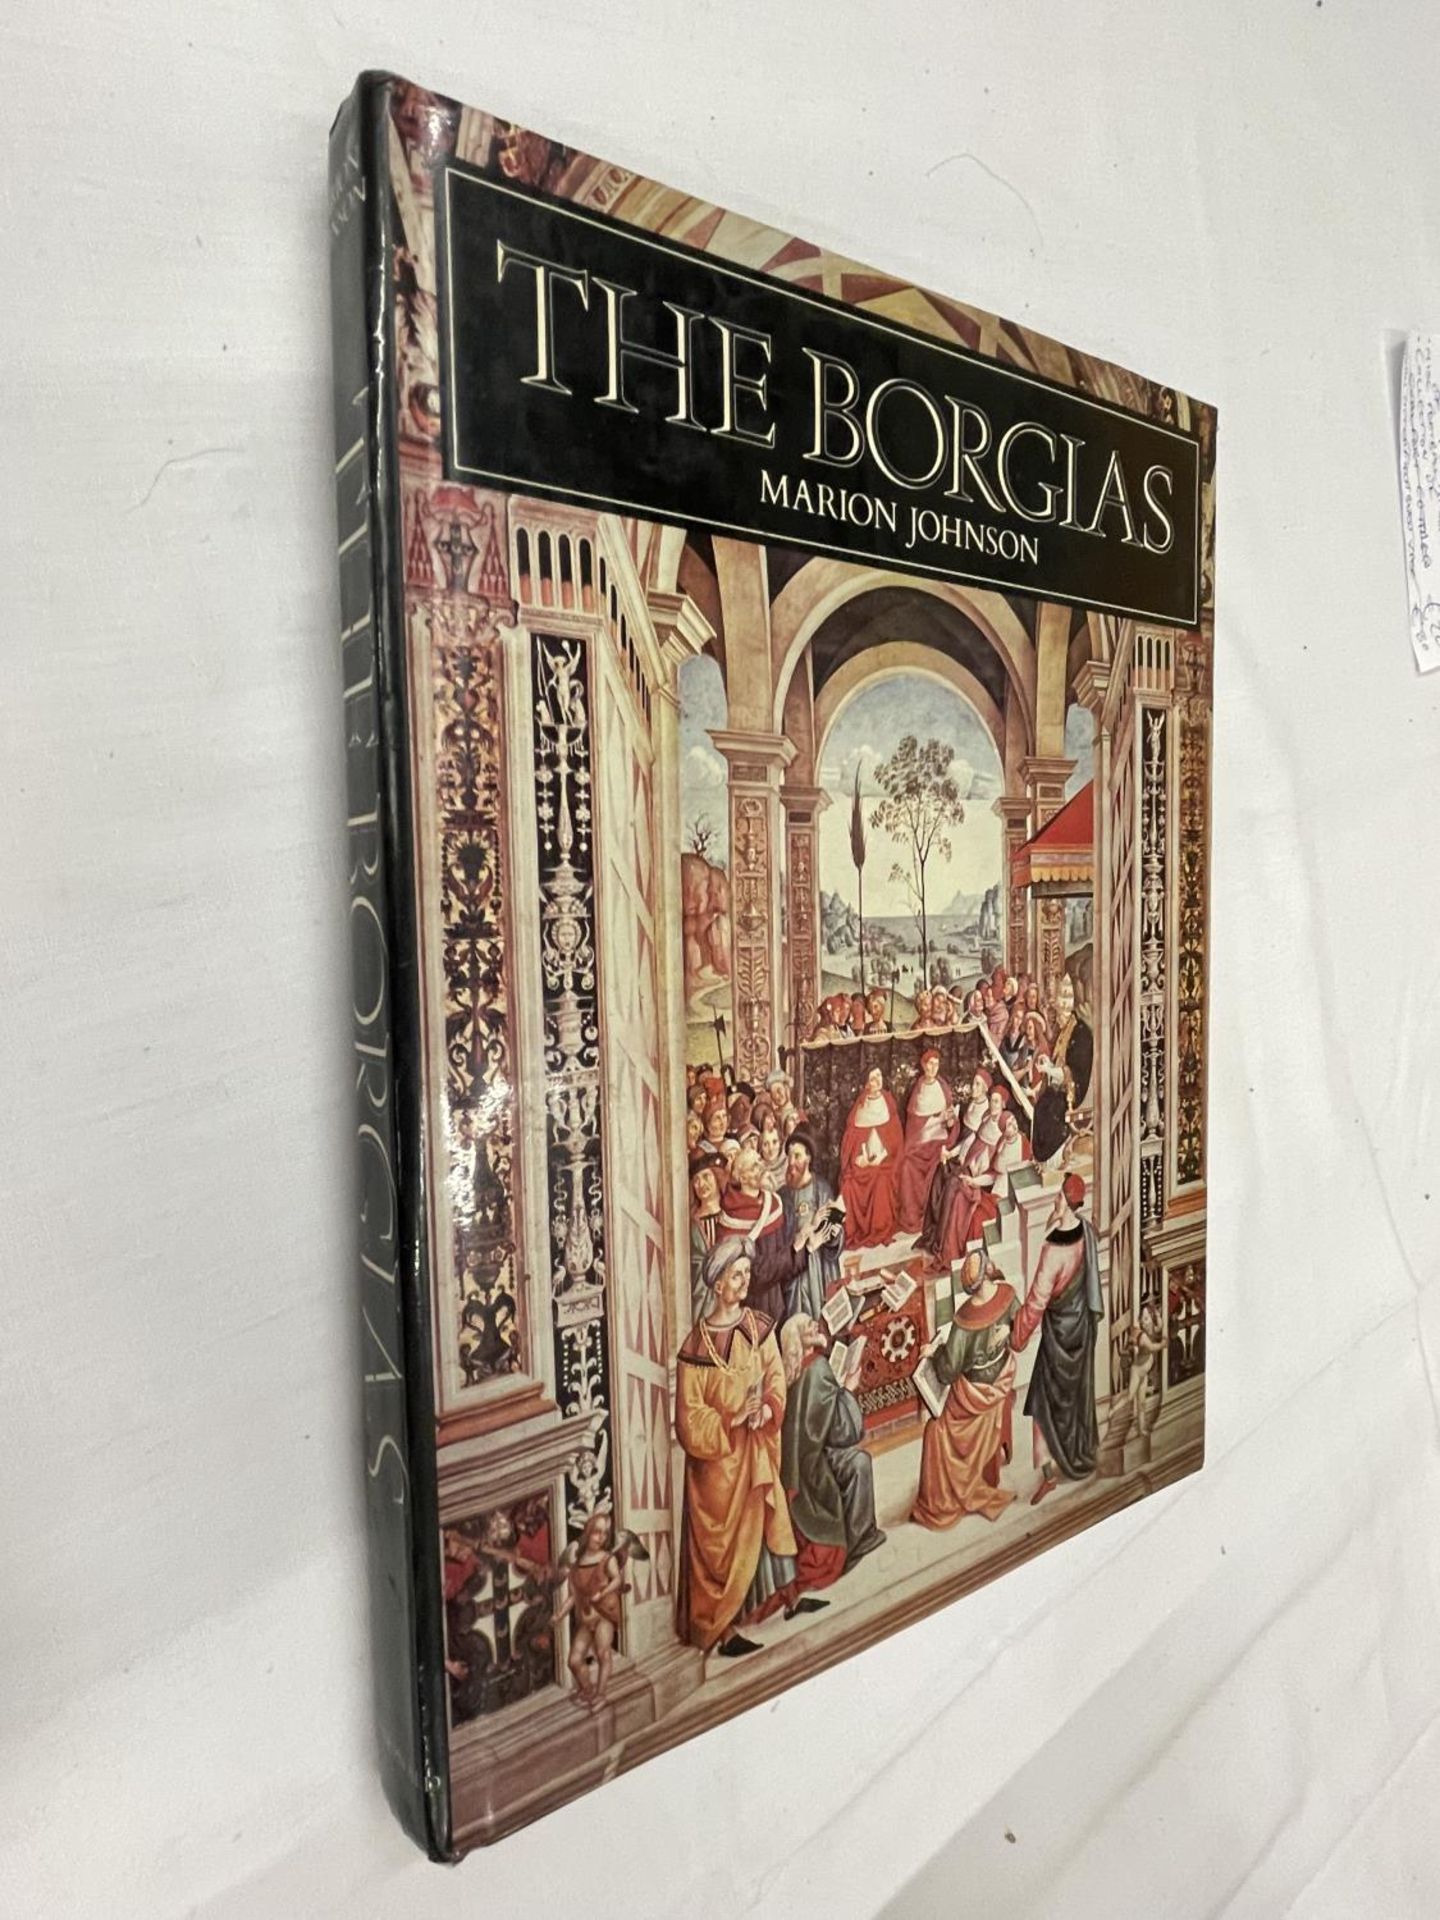 A FIRST EDITION THE BORGIAS BY MARION JOHNSON - Image 2 of 3